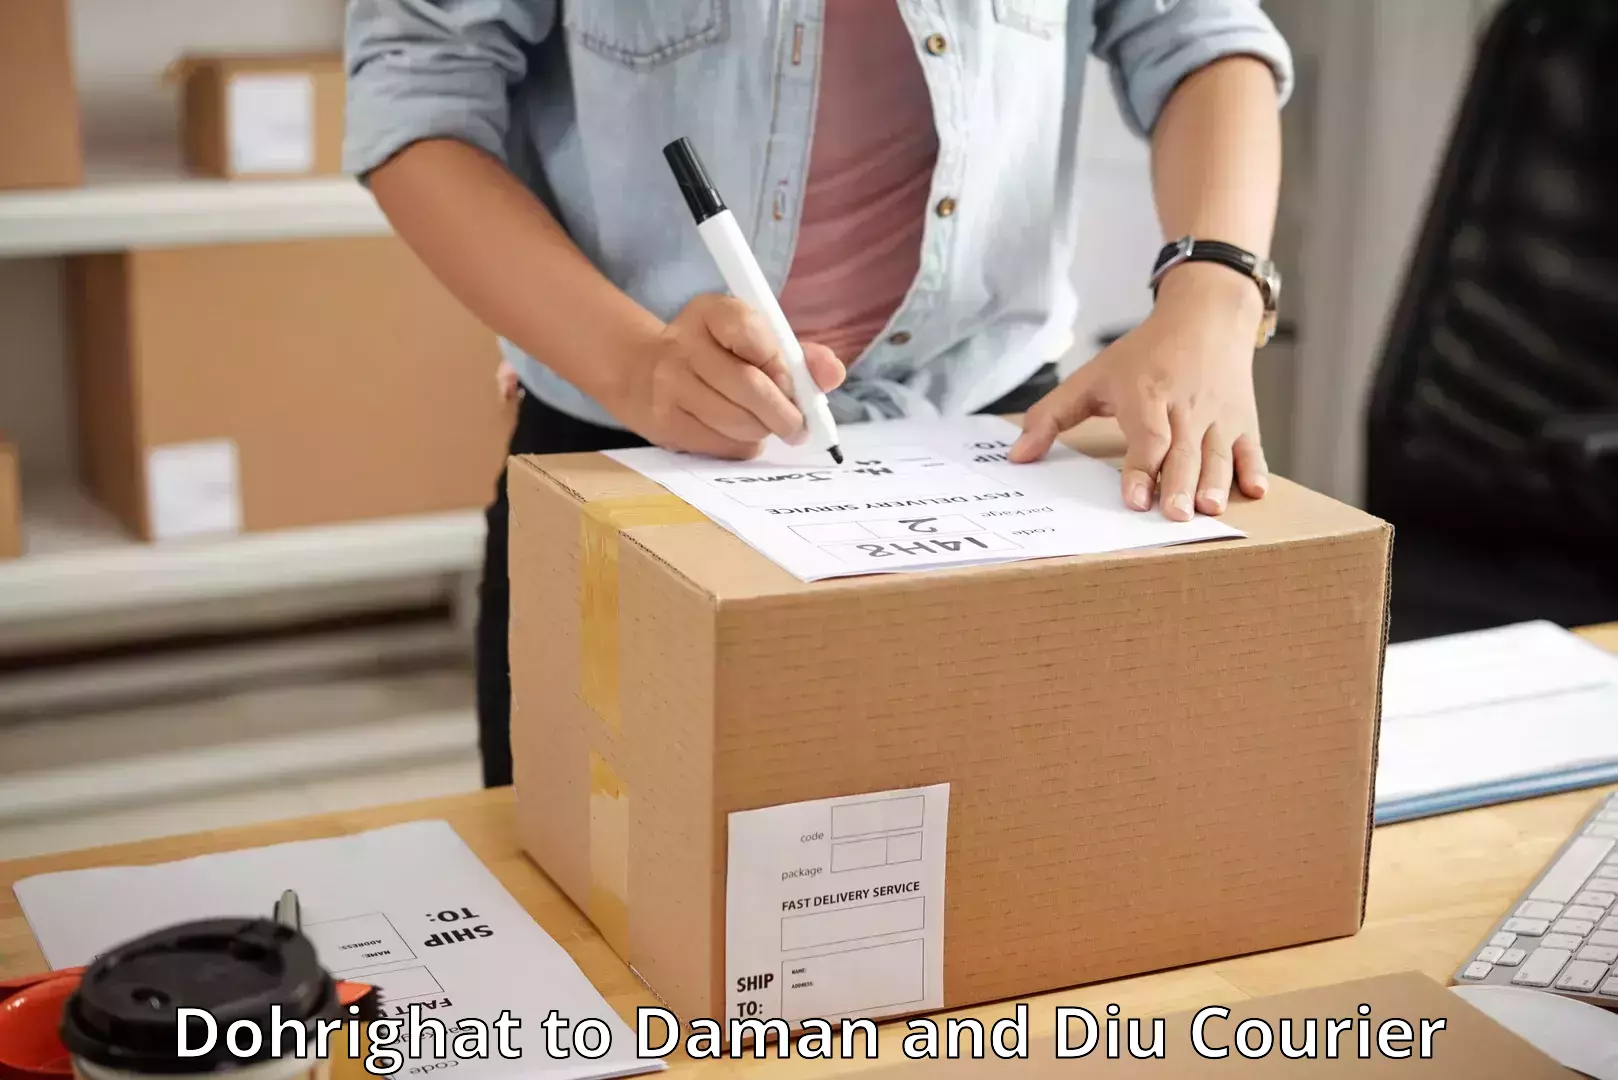 Automated parcel services Dohrighat to Daman